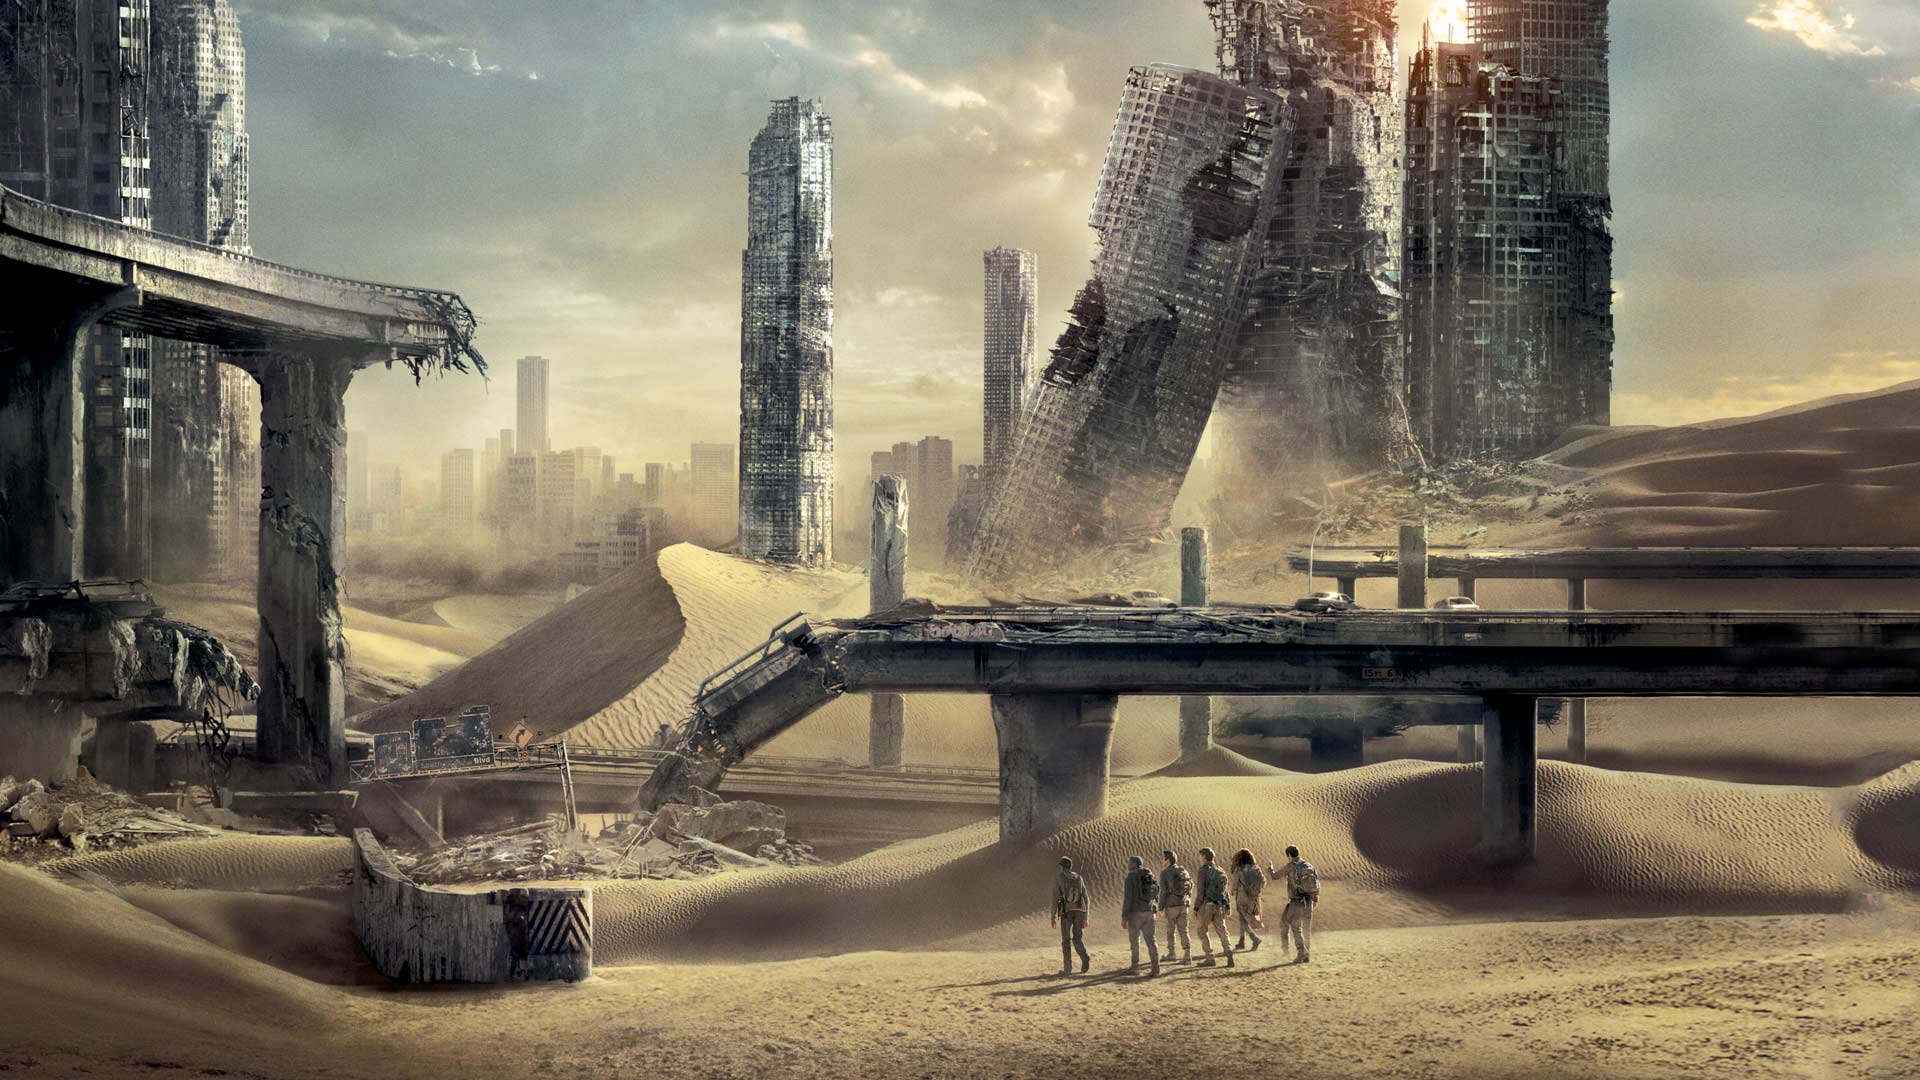 The Maze Runner 2': 'The Scorch Trials' Set for 2015